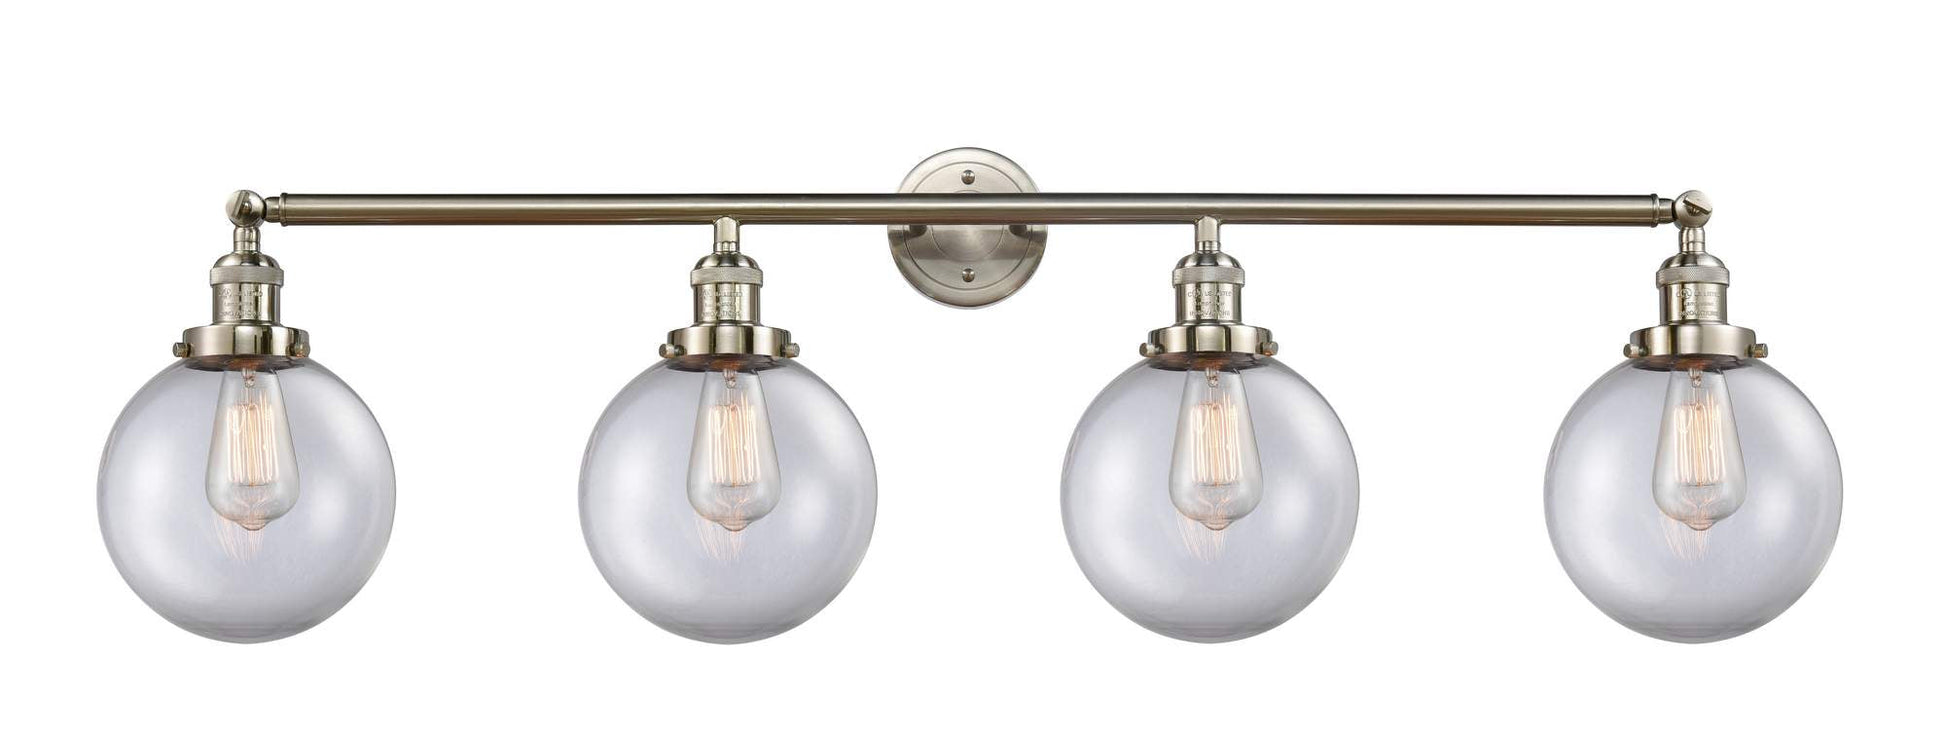 215-SN-G202-8 4-Light 44" Brushed Satin Nickel Bath Vanity Light - Clear Beacon Glass - LED Bulb - Dimmensions: 44 x 9.125 x 14.125 - Glass Up or Down: Yes